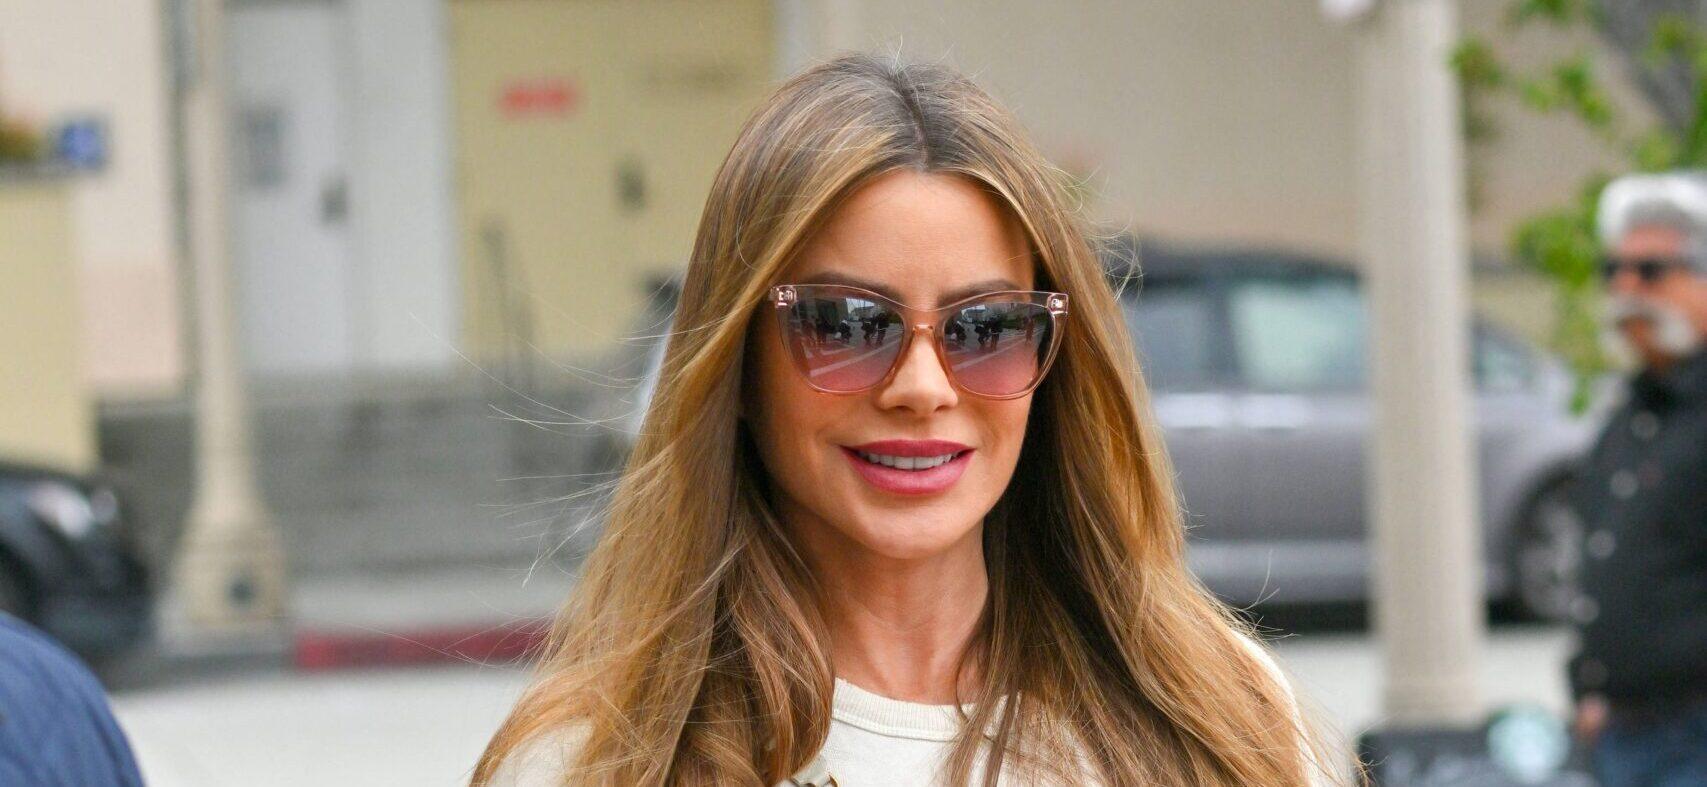 Sofia Vergara keeps it casual as she makes her way to America's Got Talent in Pasadena Ca